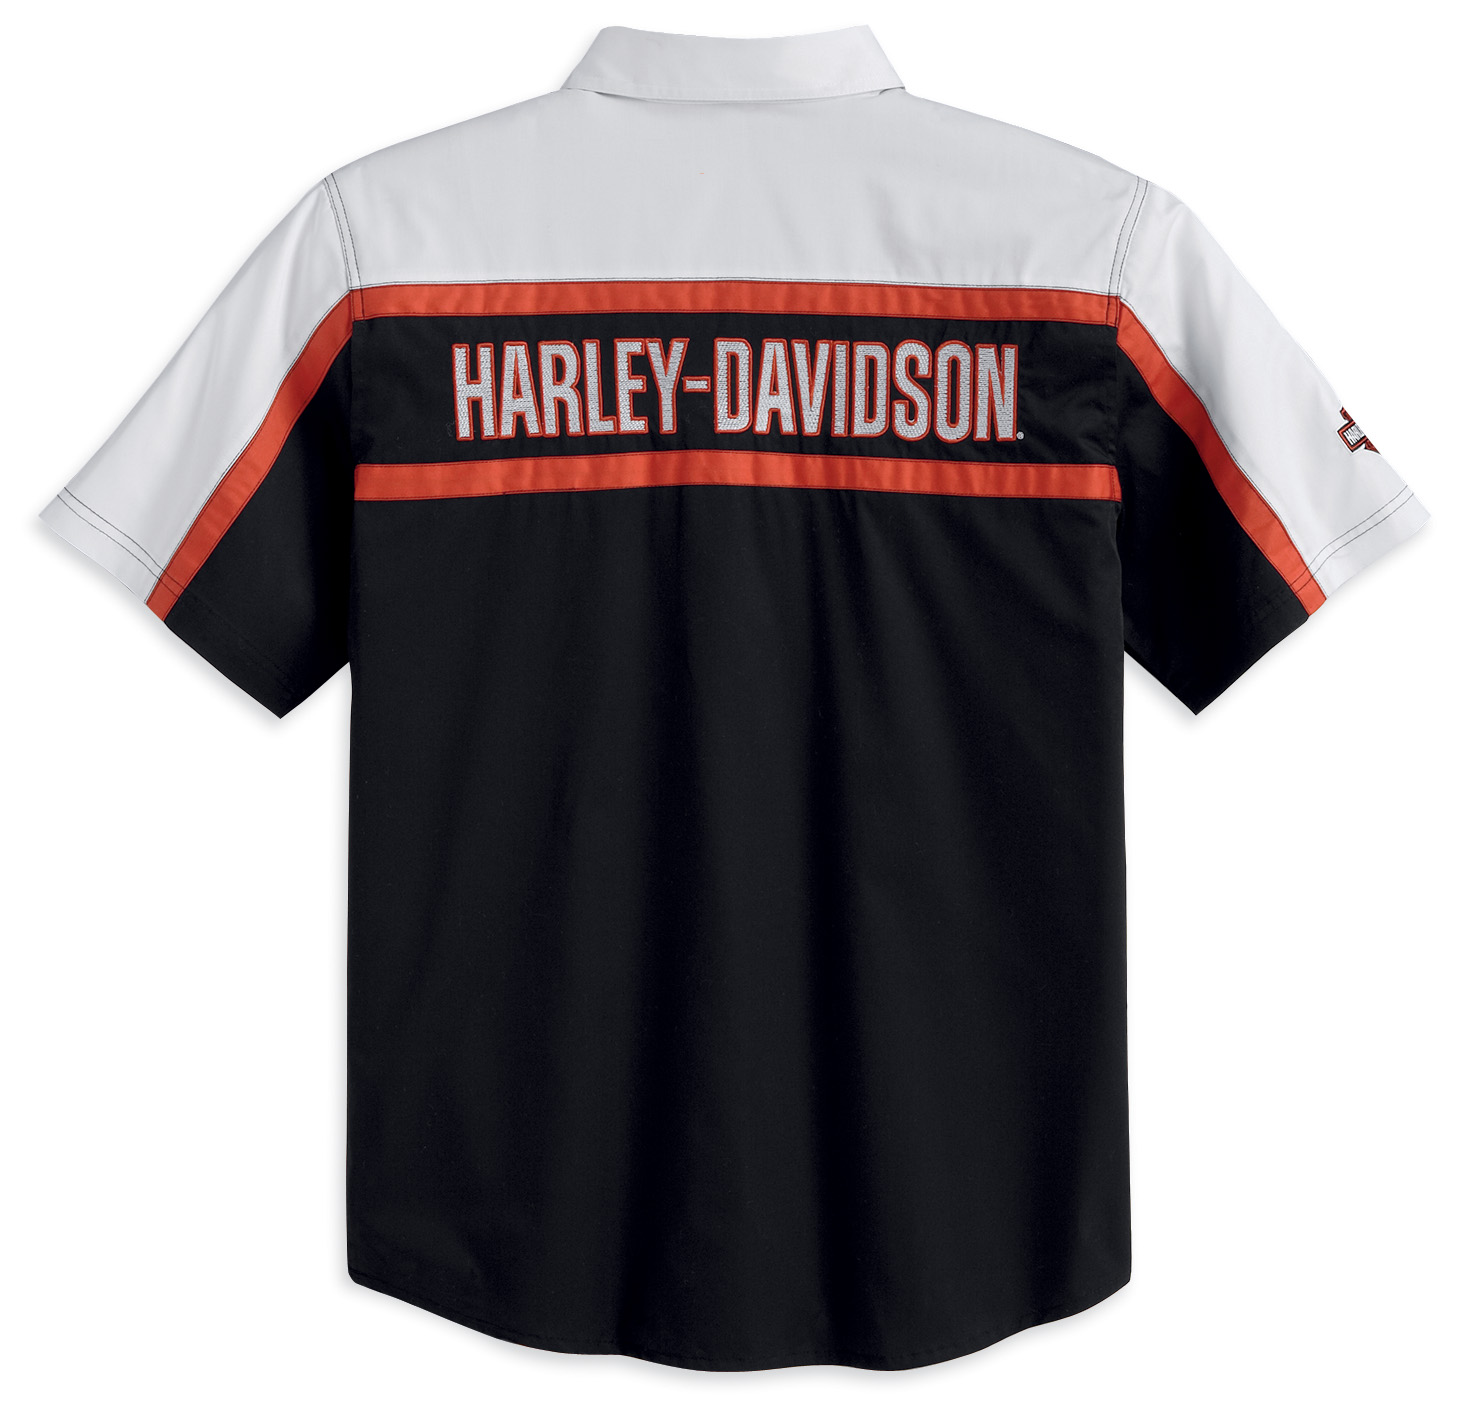 NEW MEN’S PERFORMANCE S/S WOVEN SHIRT FROM HARLEY-DAVIDSON | Born To ...